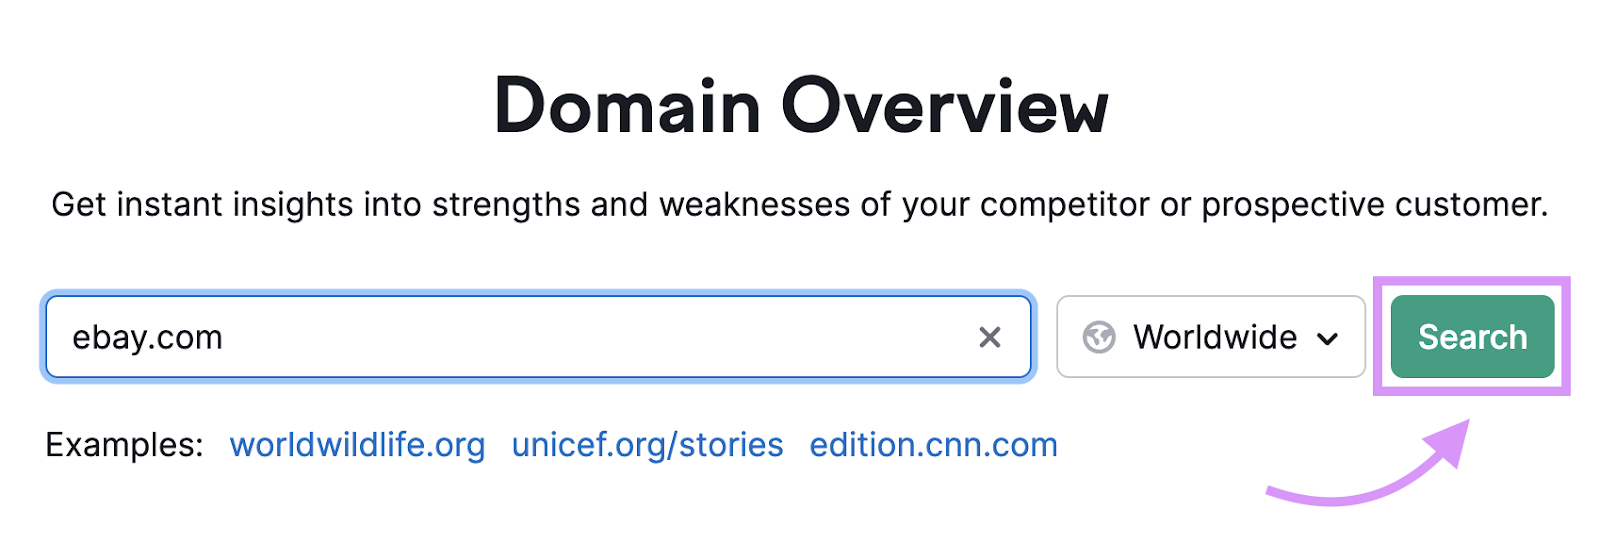 "ebay.com" entered into Domain Overview tool search bar